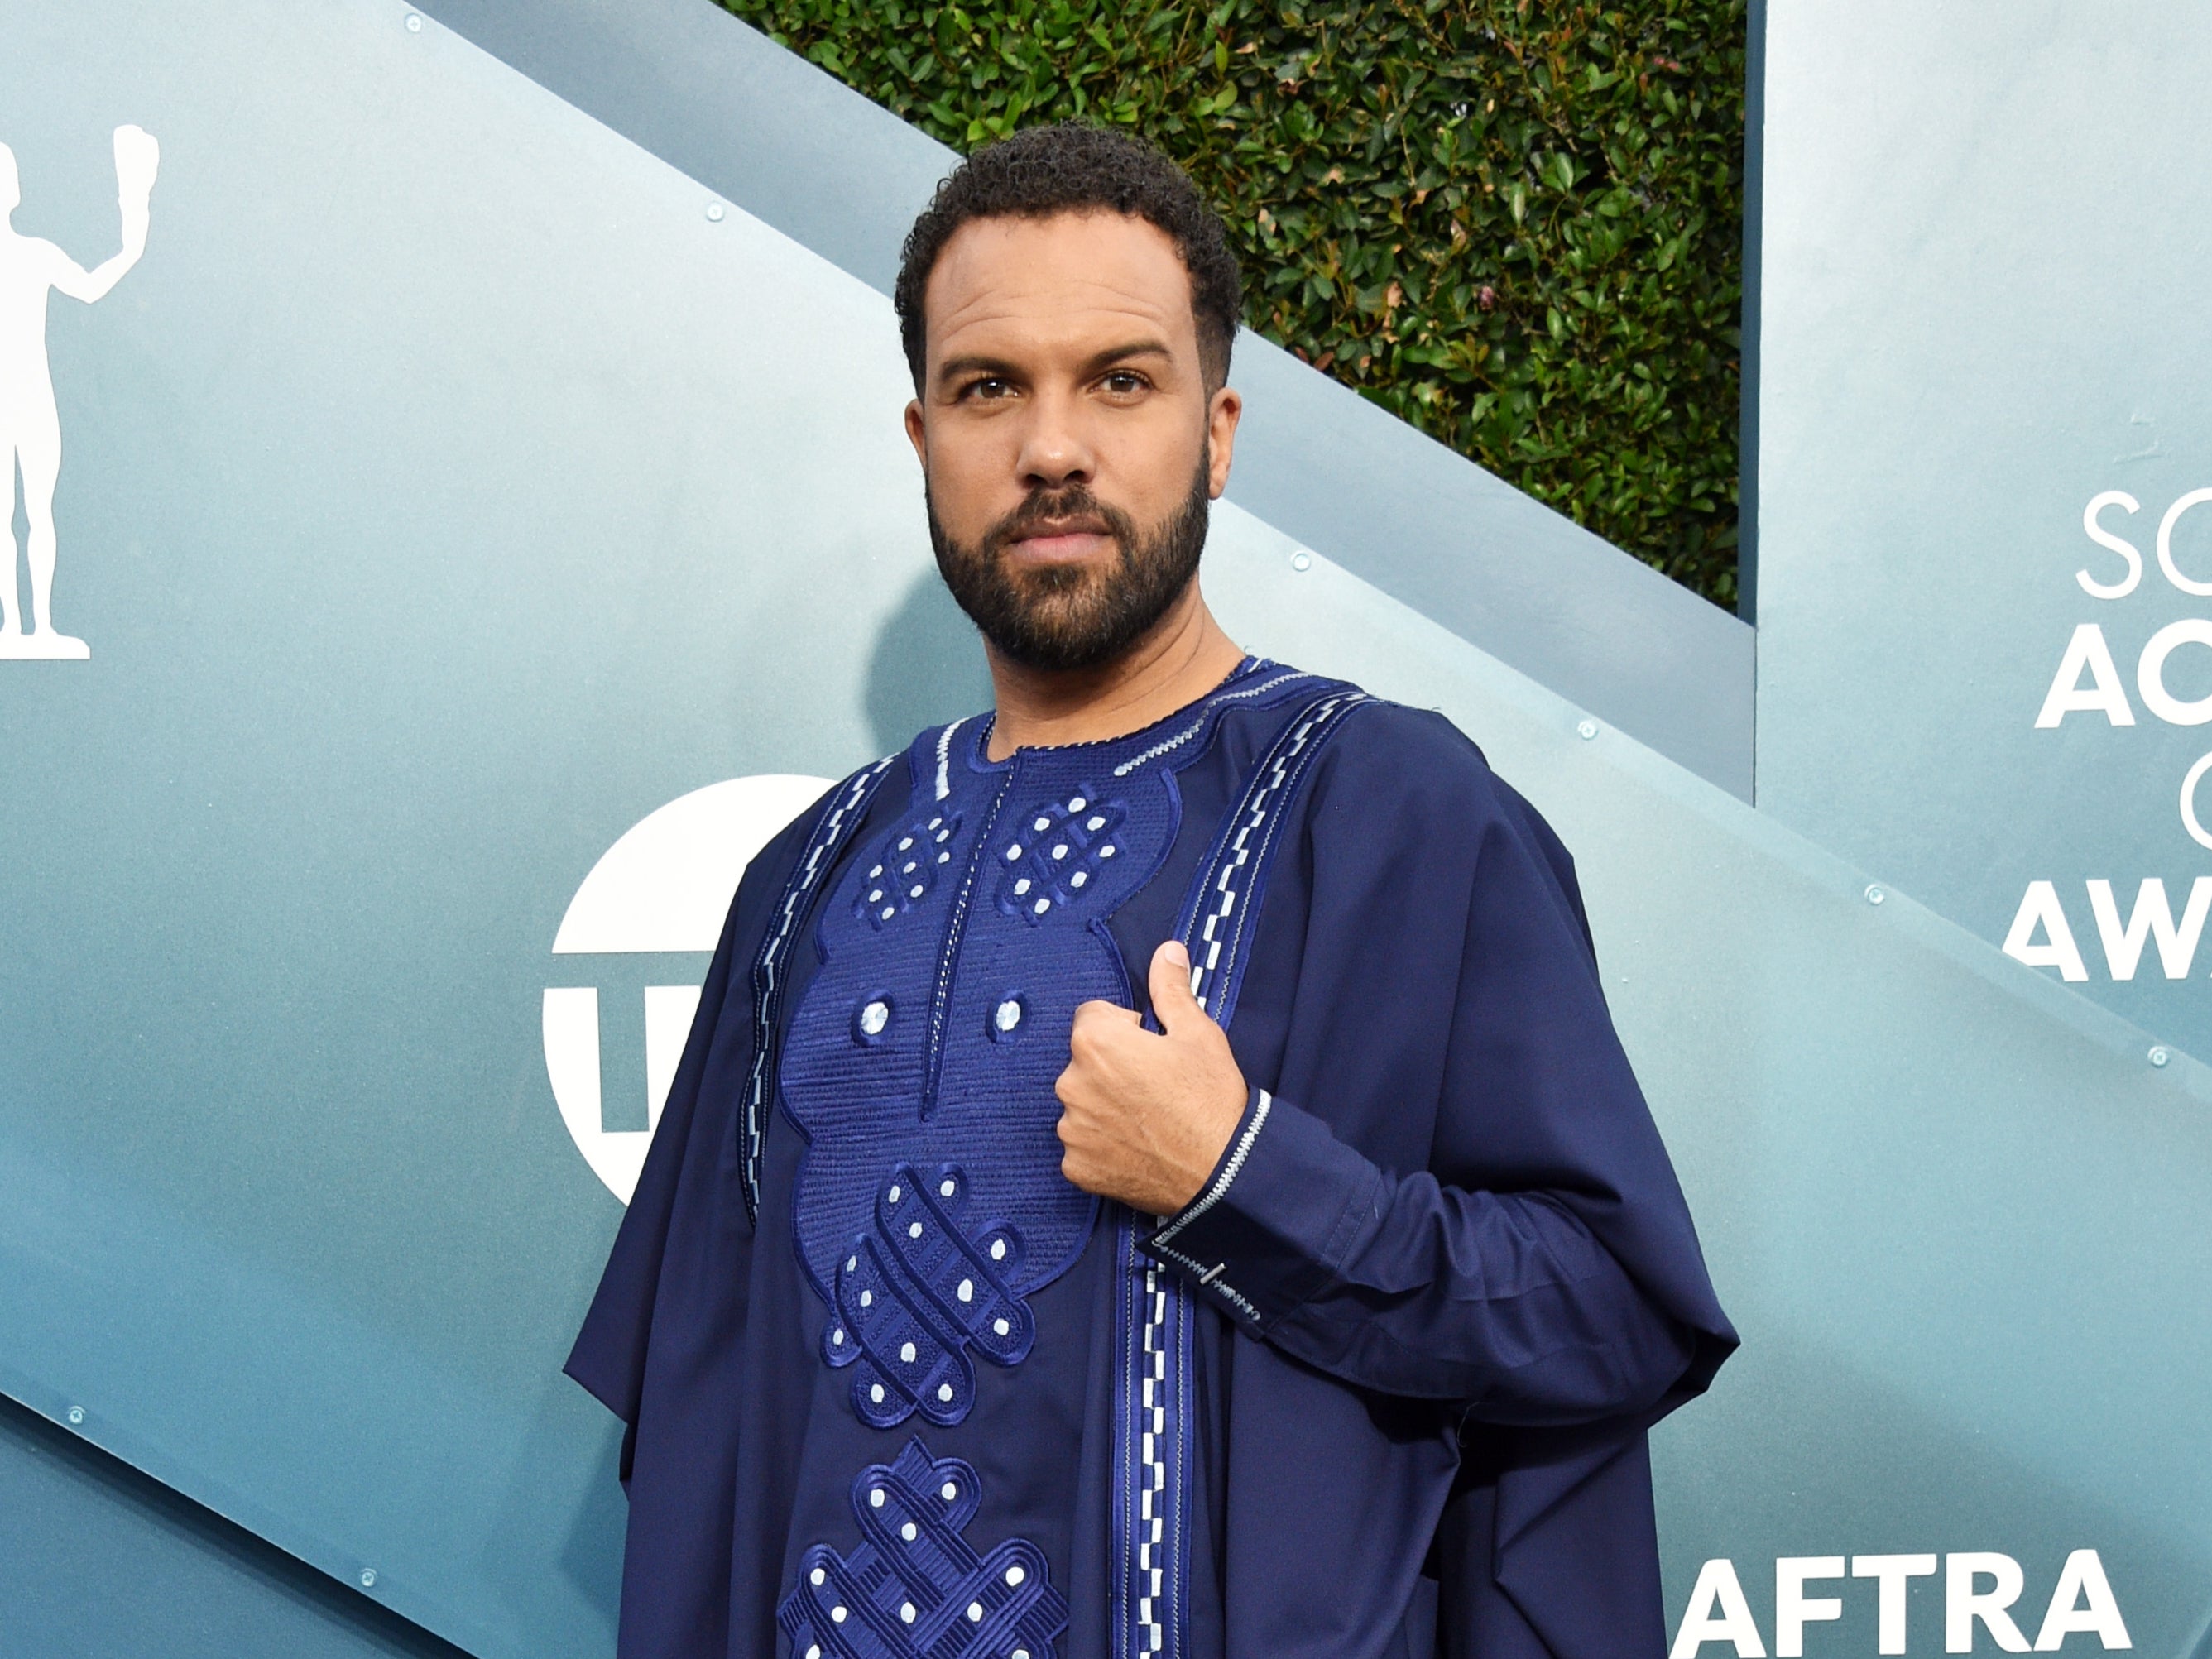 O-T Fagbenle at the 26th Annual Screen Actors Guild Awards on 19 January 2020 in Los Angeles, California